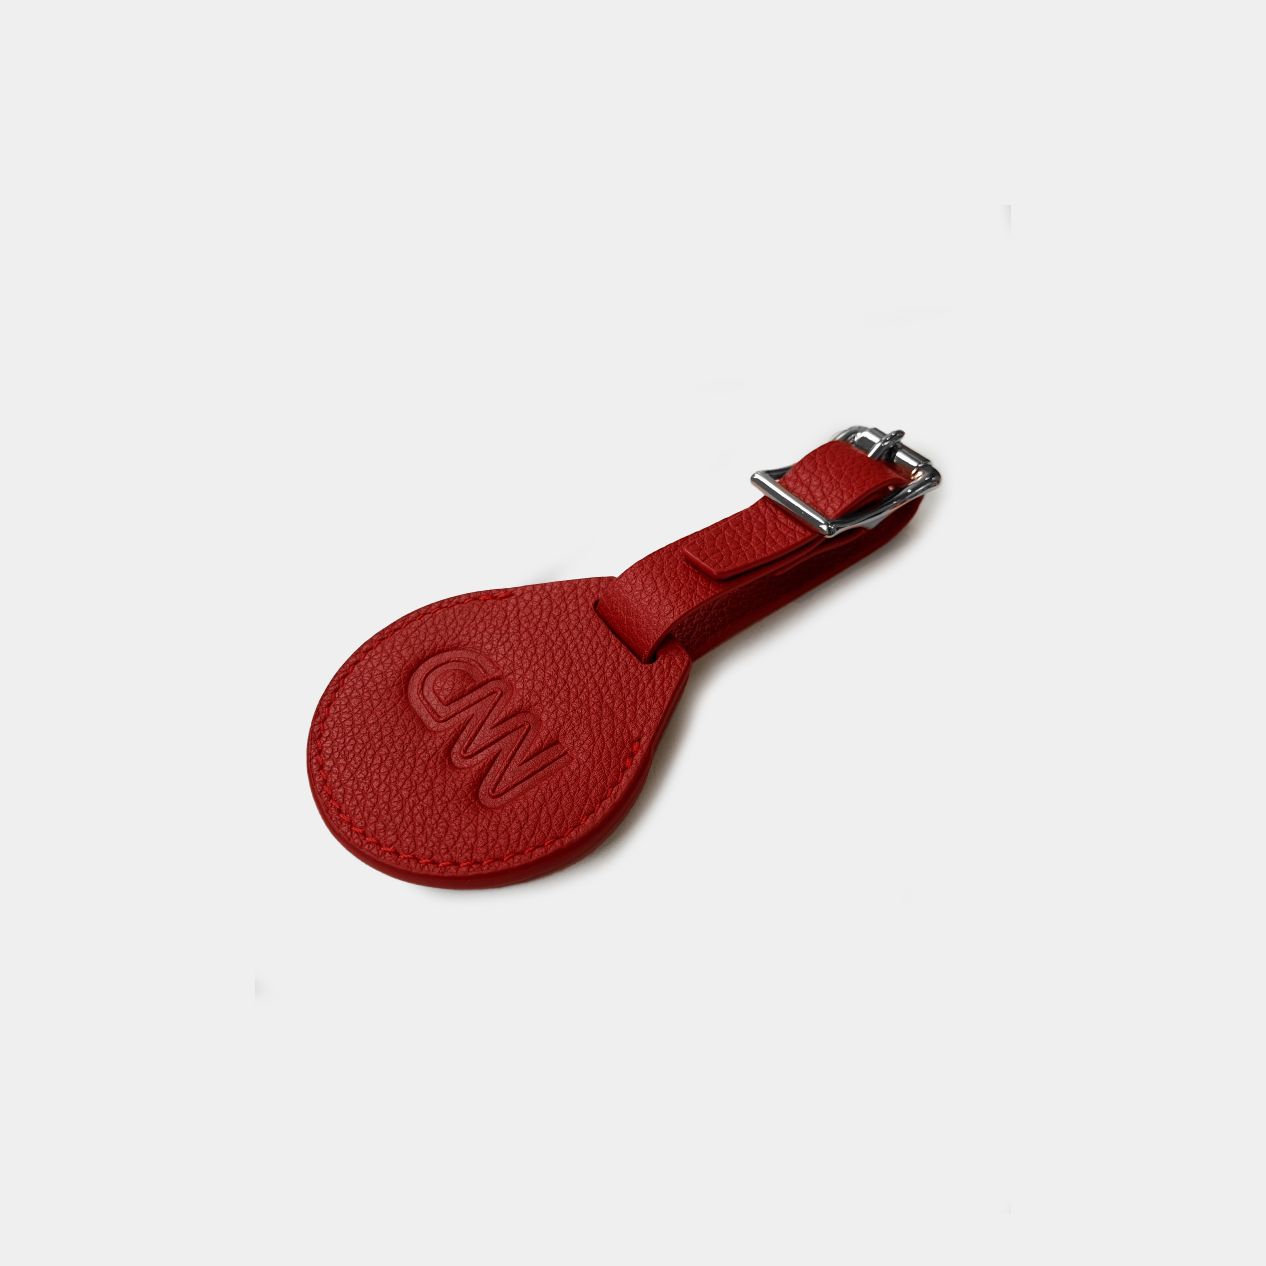 Luxury leather luggage tag designed to hold the Apple AirTag or a fob with gold or silver buckle